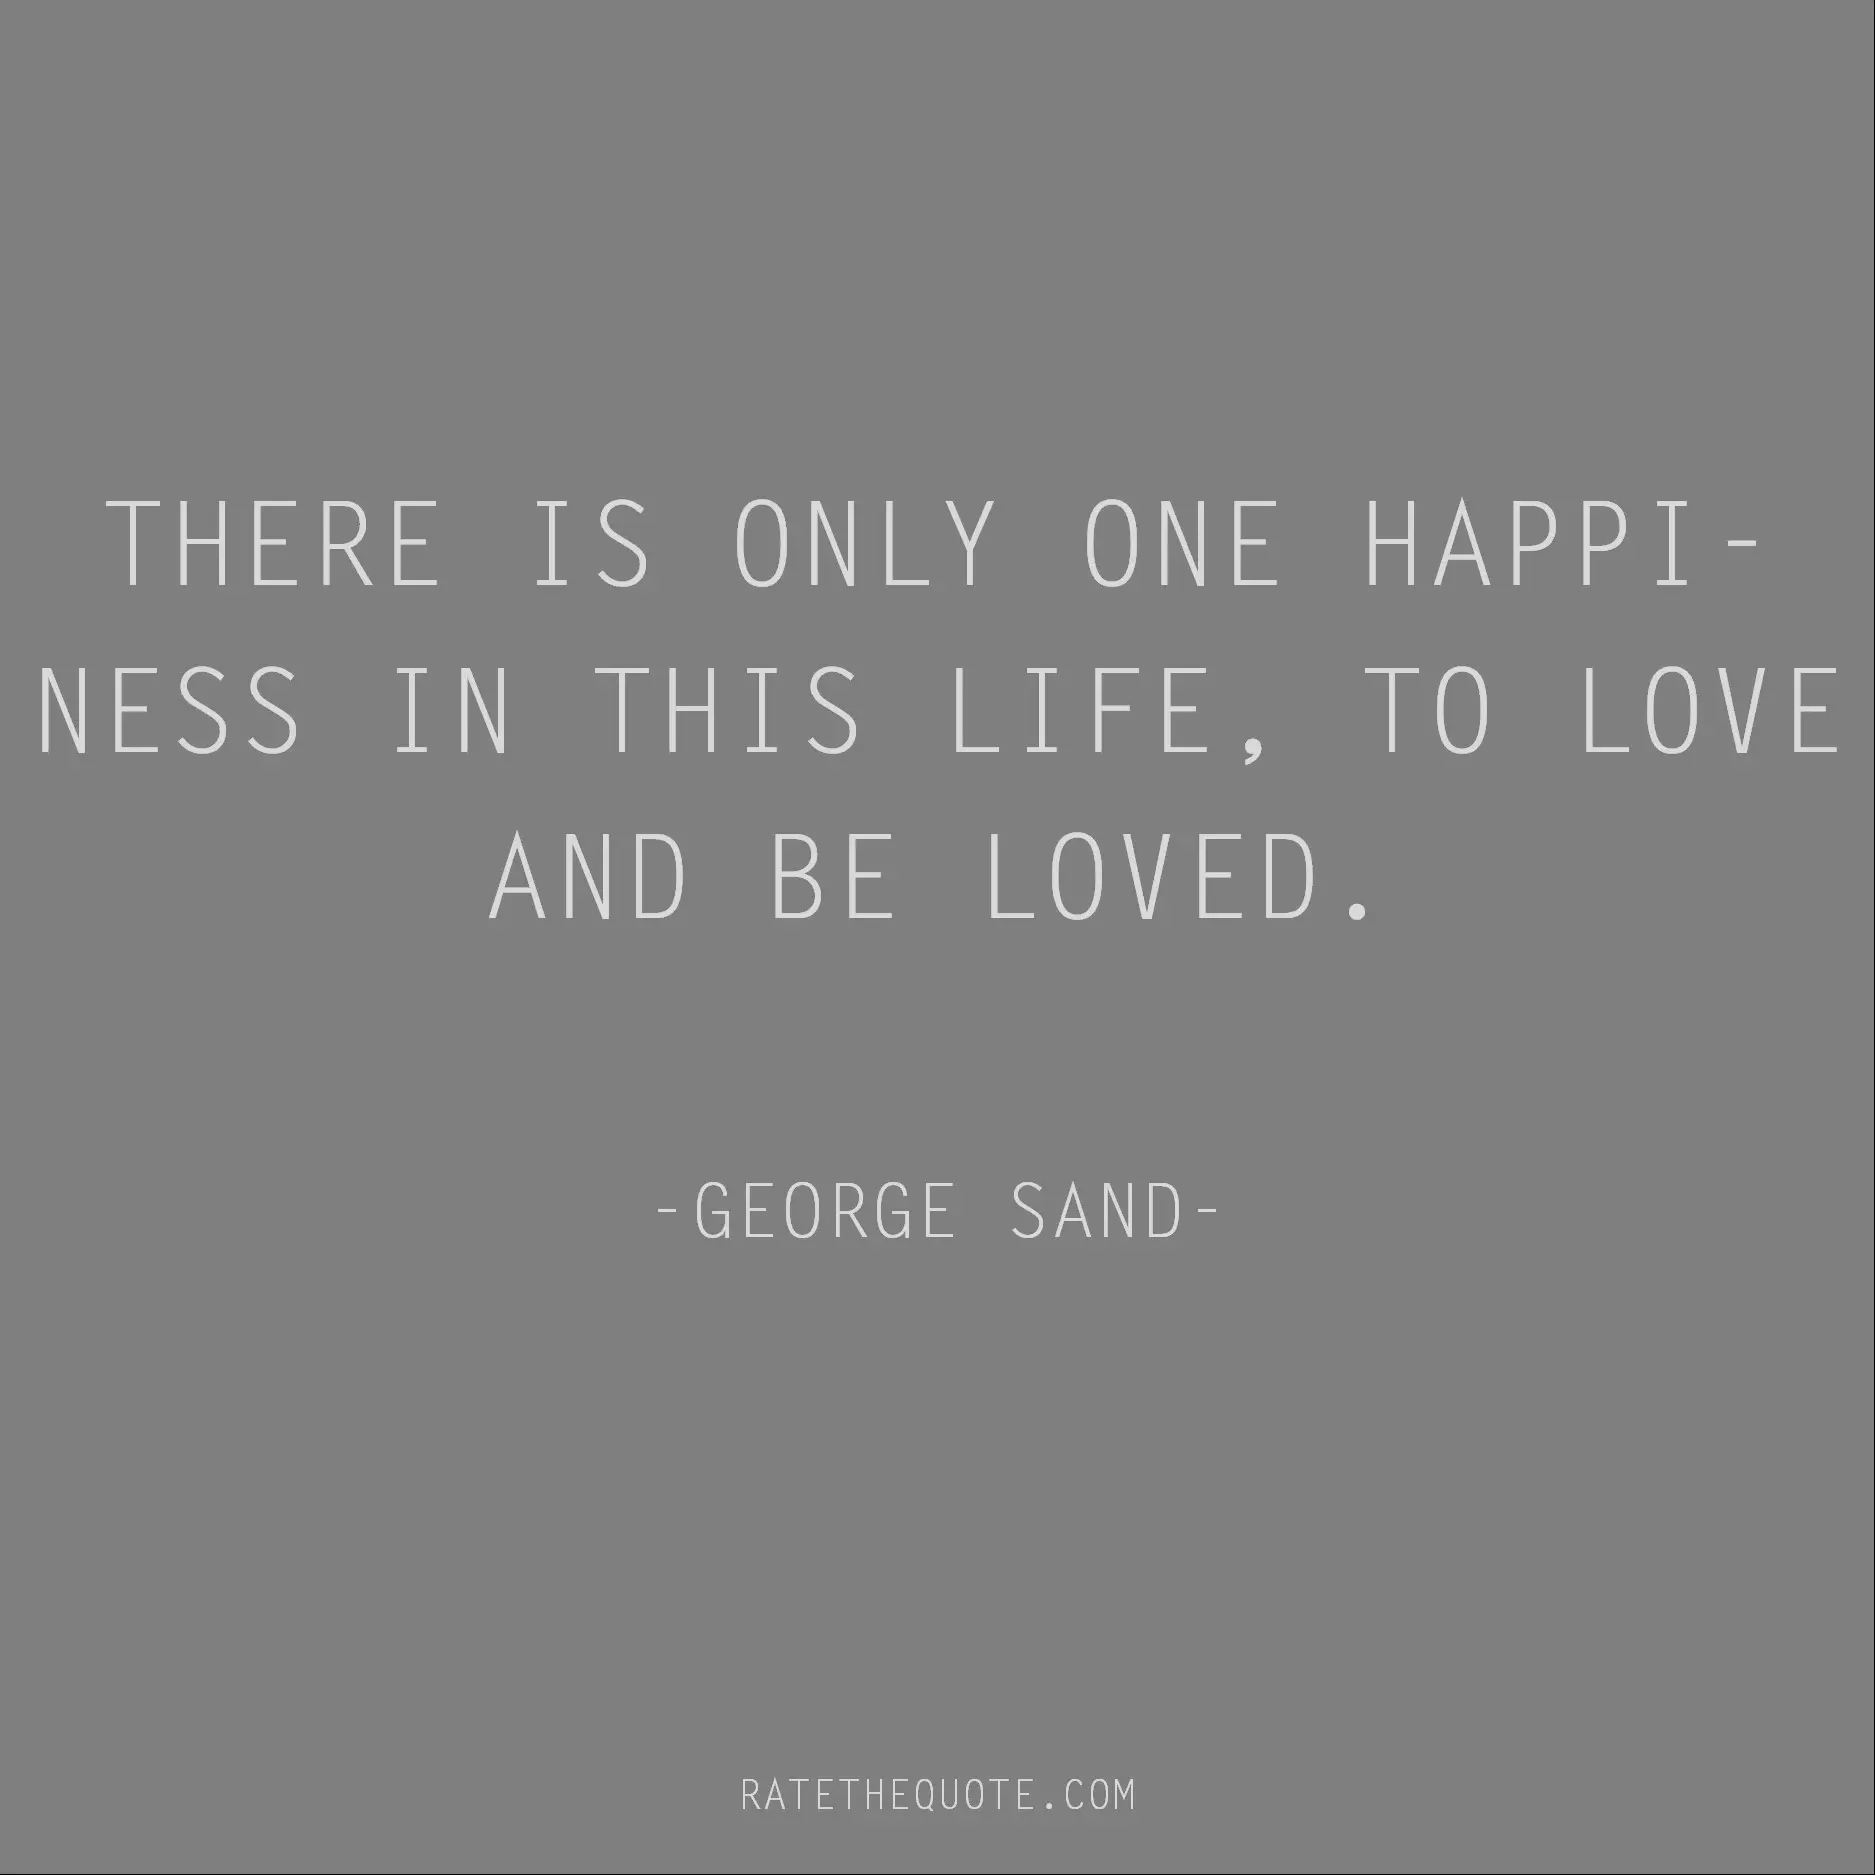 Happiness Quotes There is only one happiness in this life, to love and be loved. George Sand